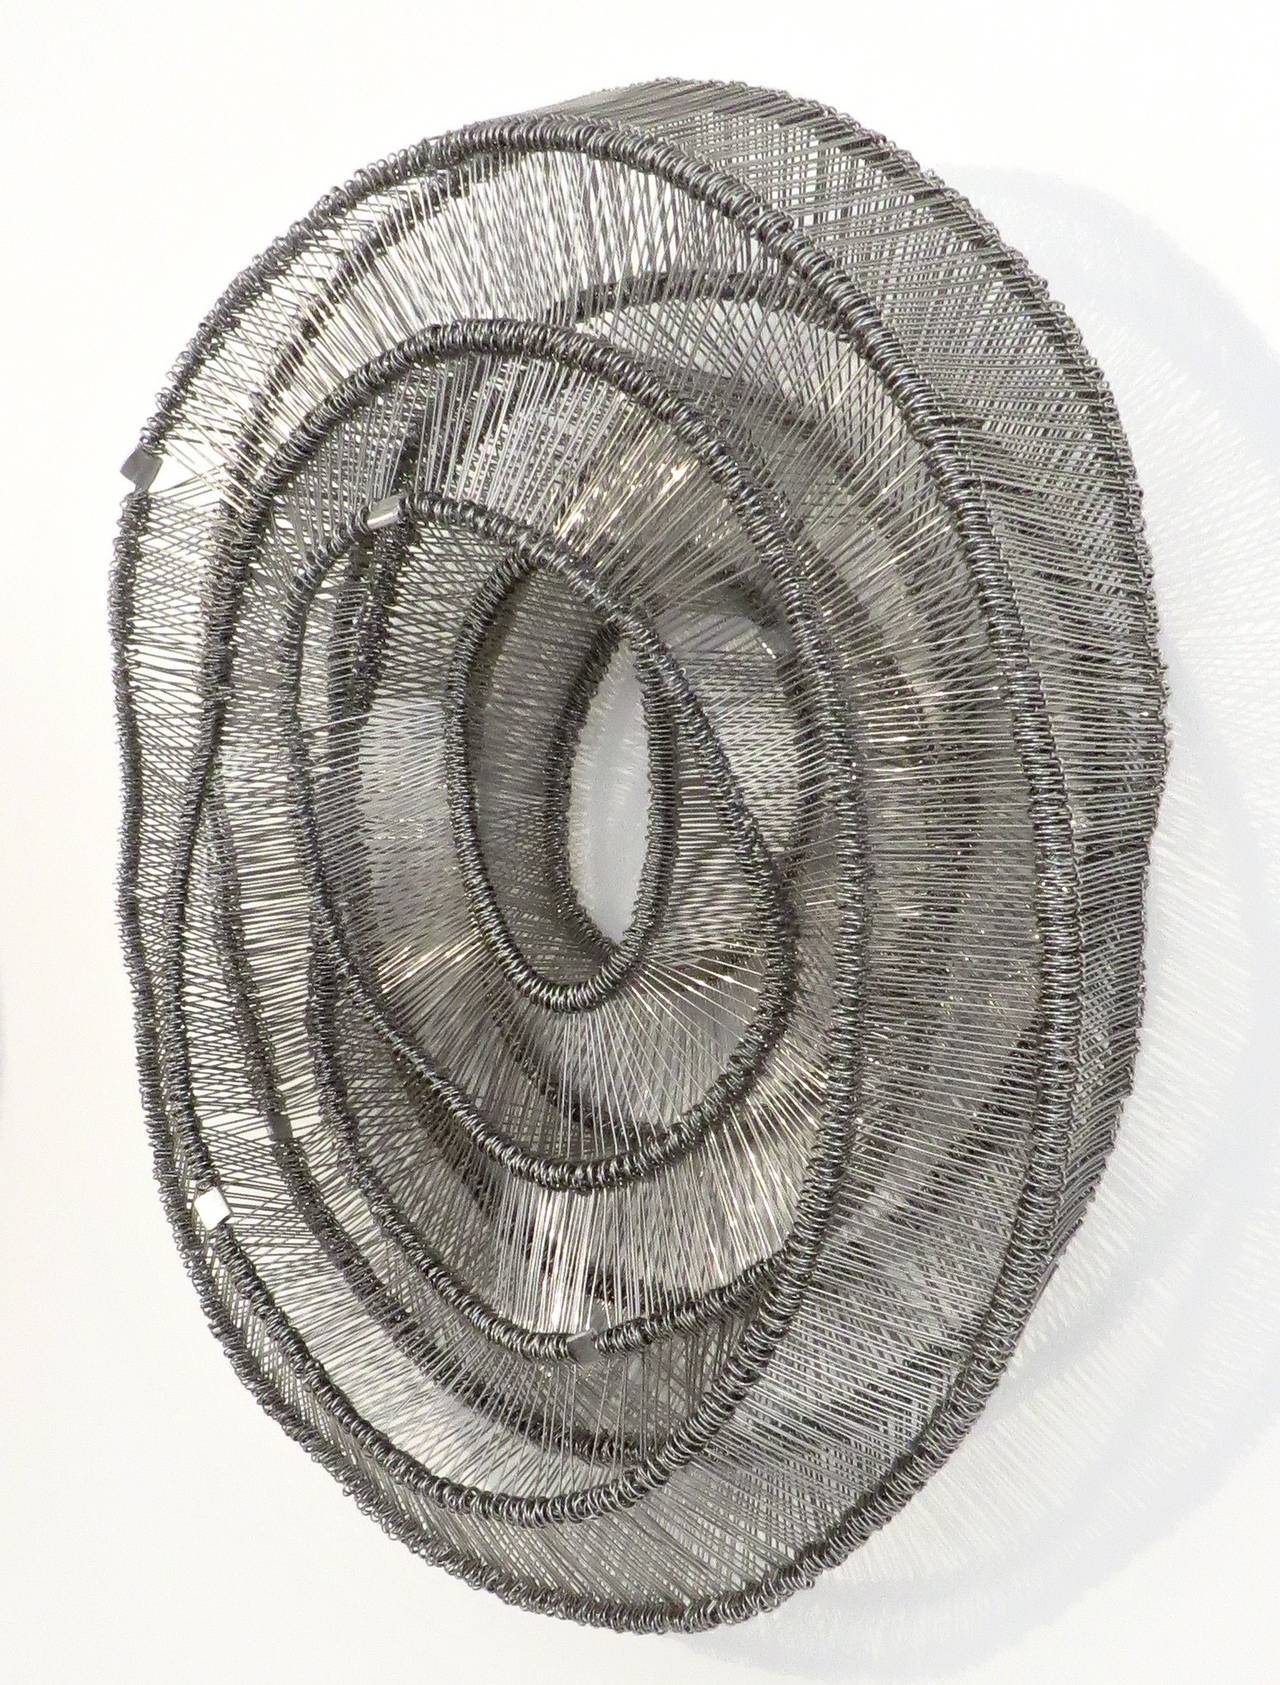 Contemporary Eric Gushee Emergence Series No. 1 Stainless Steel Woven Metal Sculpture, 2015